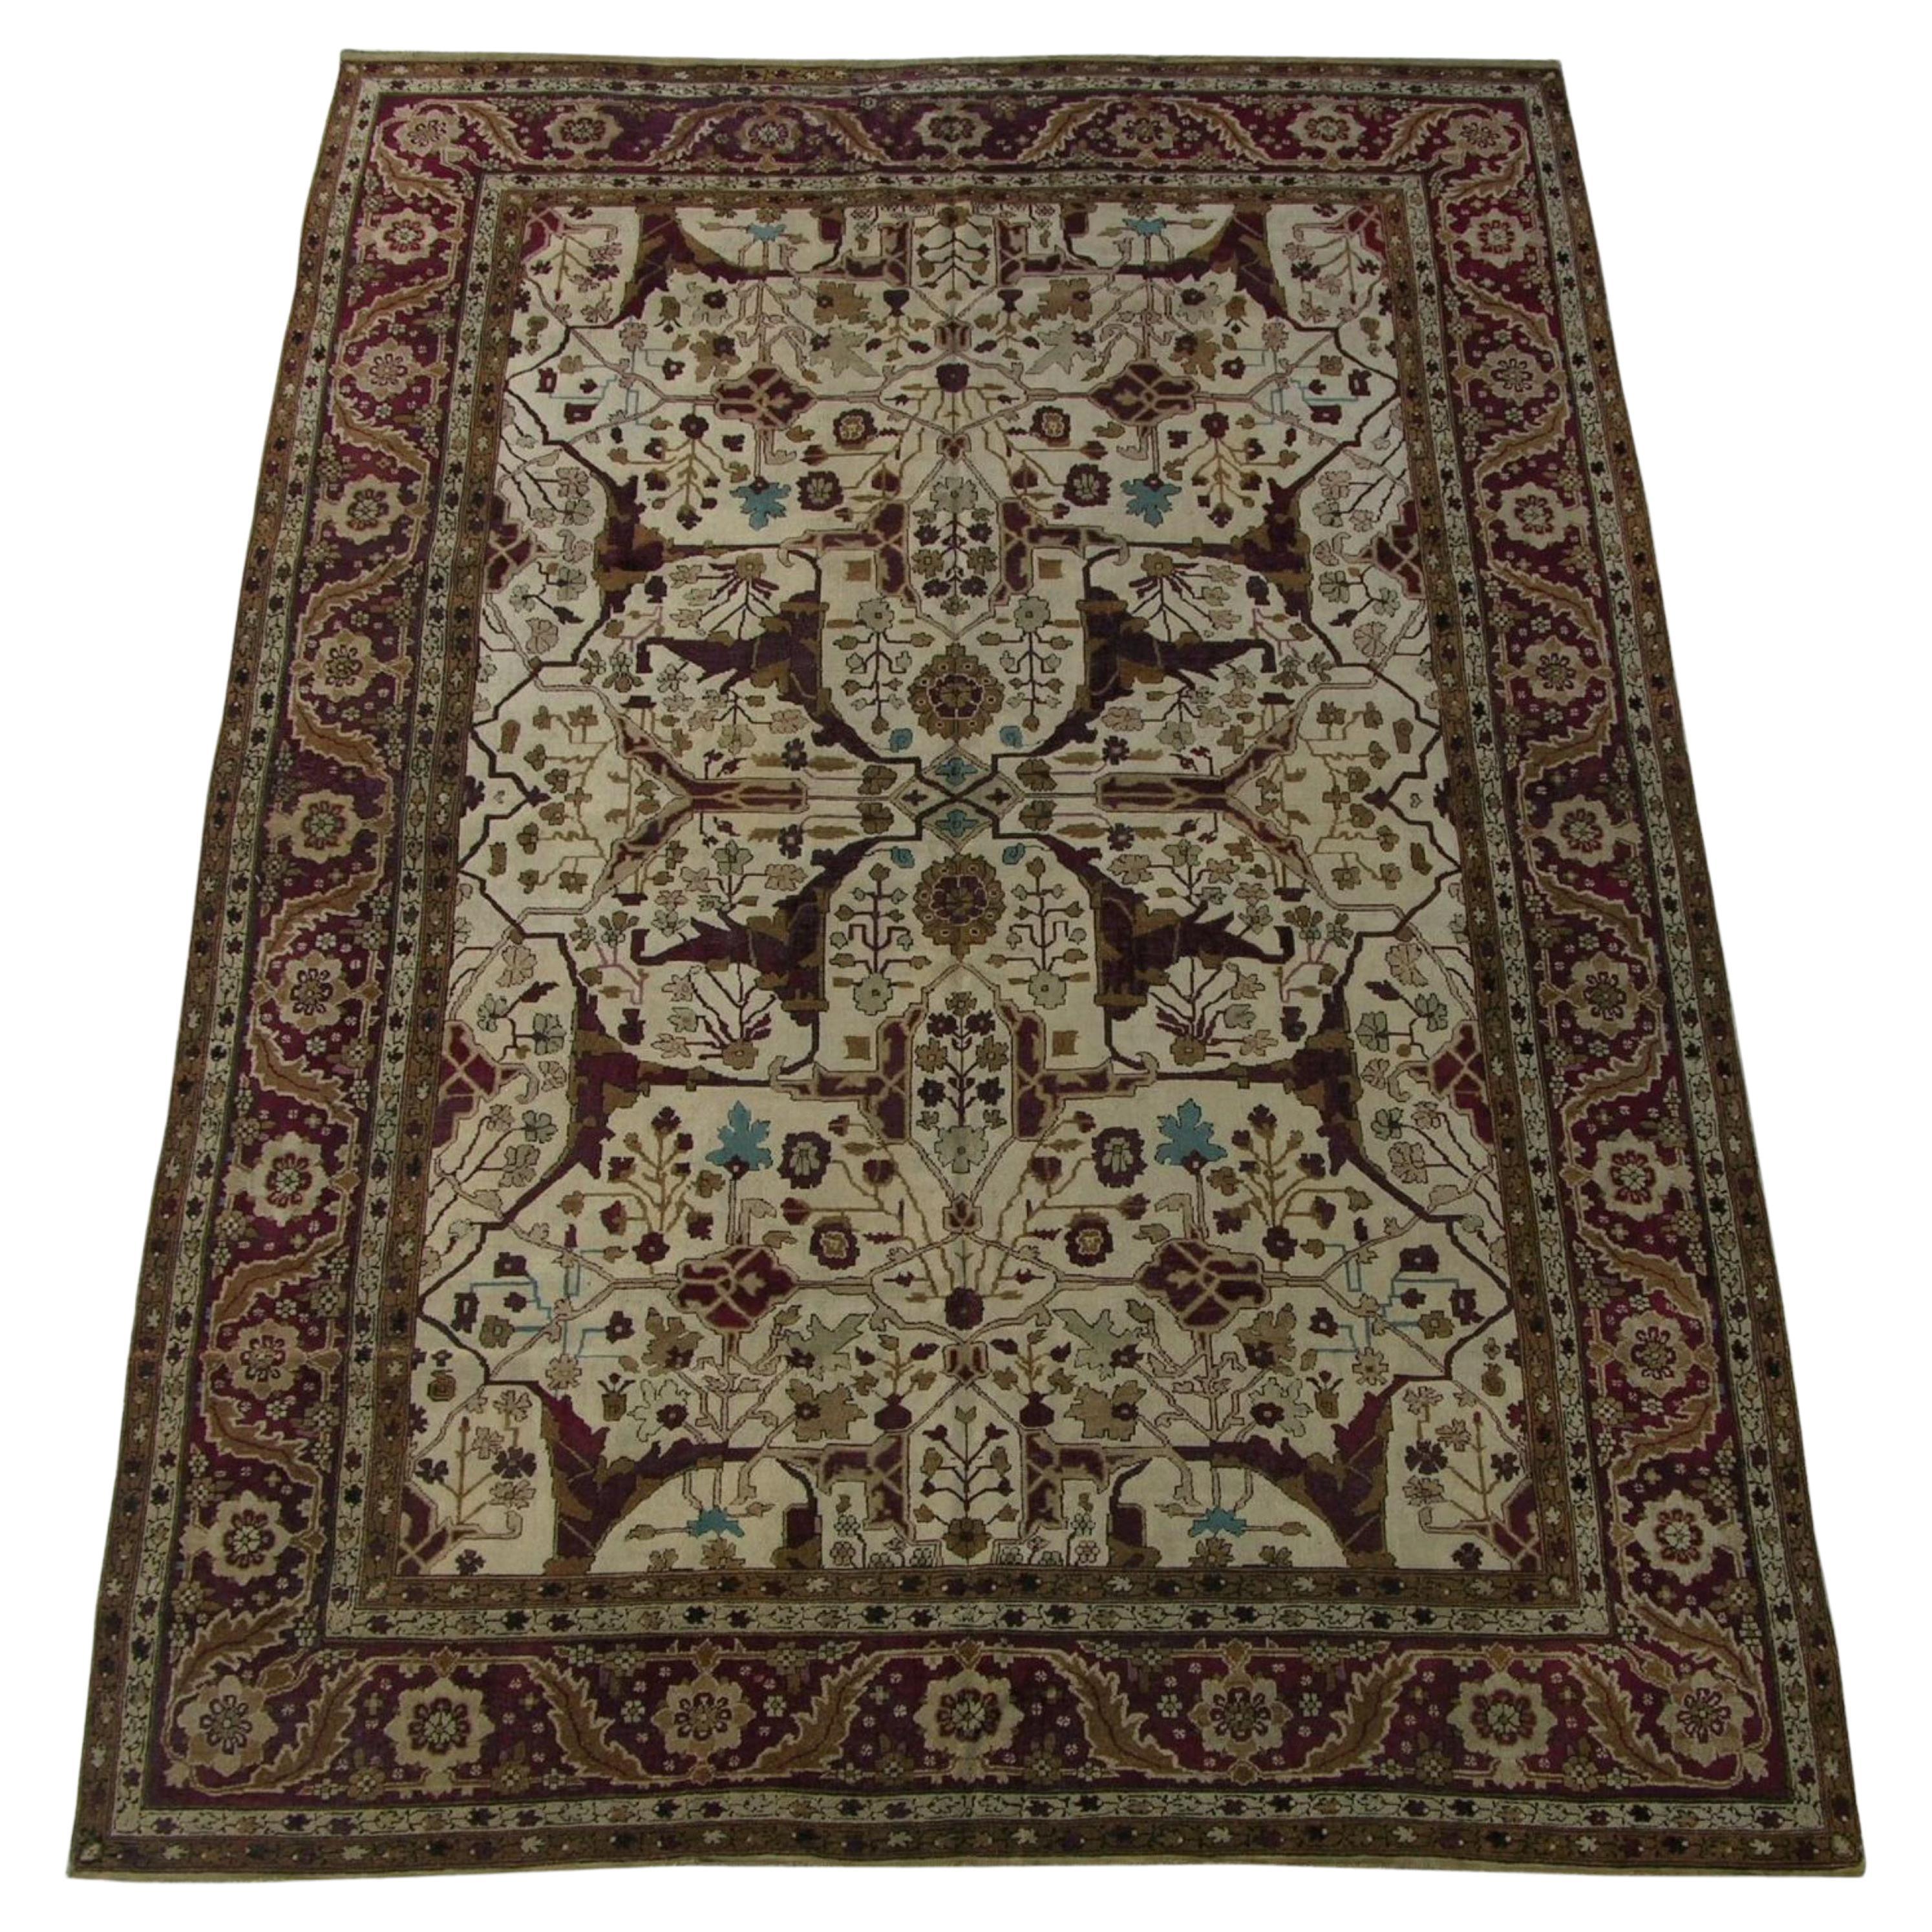 1900s Antique Indian Agra Rug - 12'5'' X 11'10'' For Sale